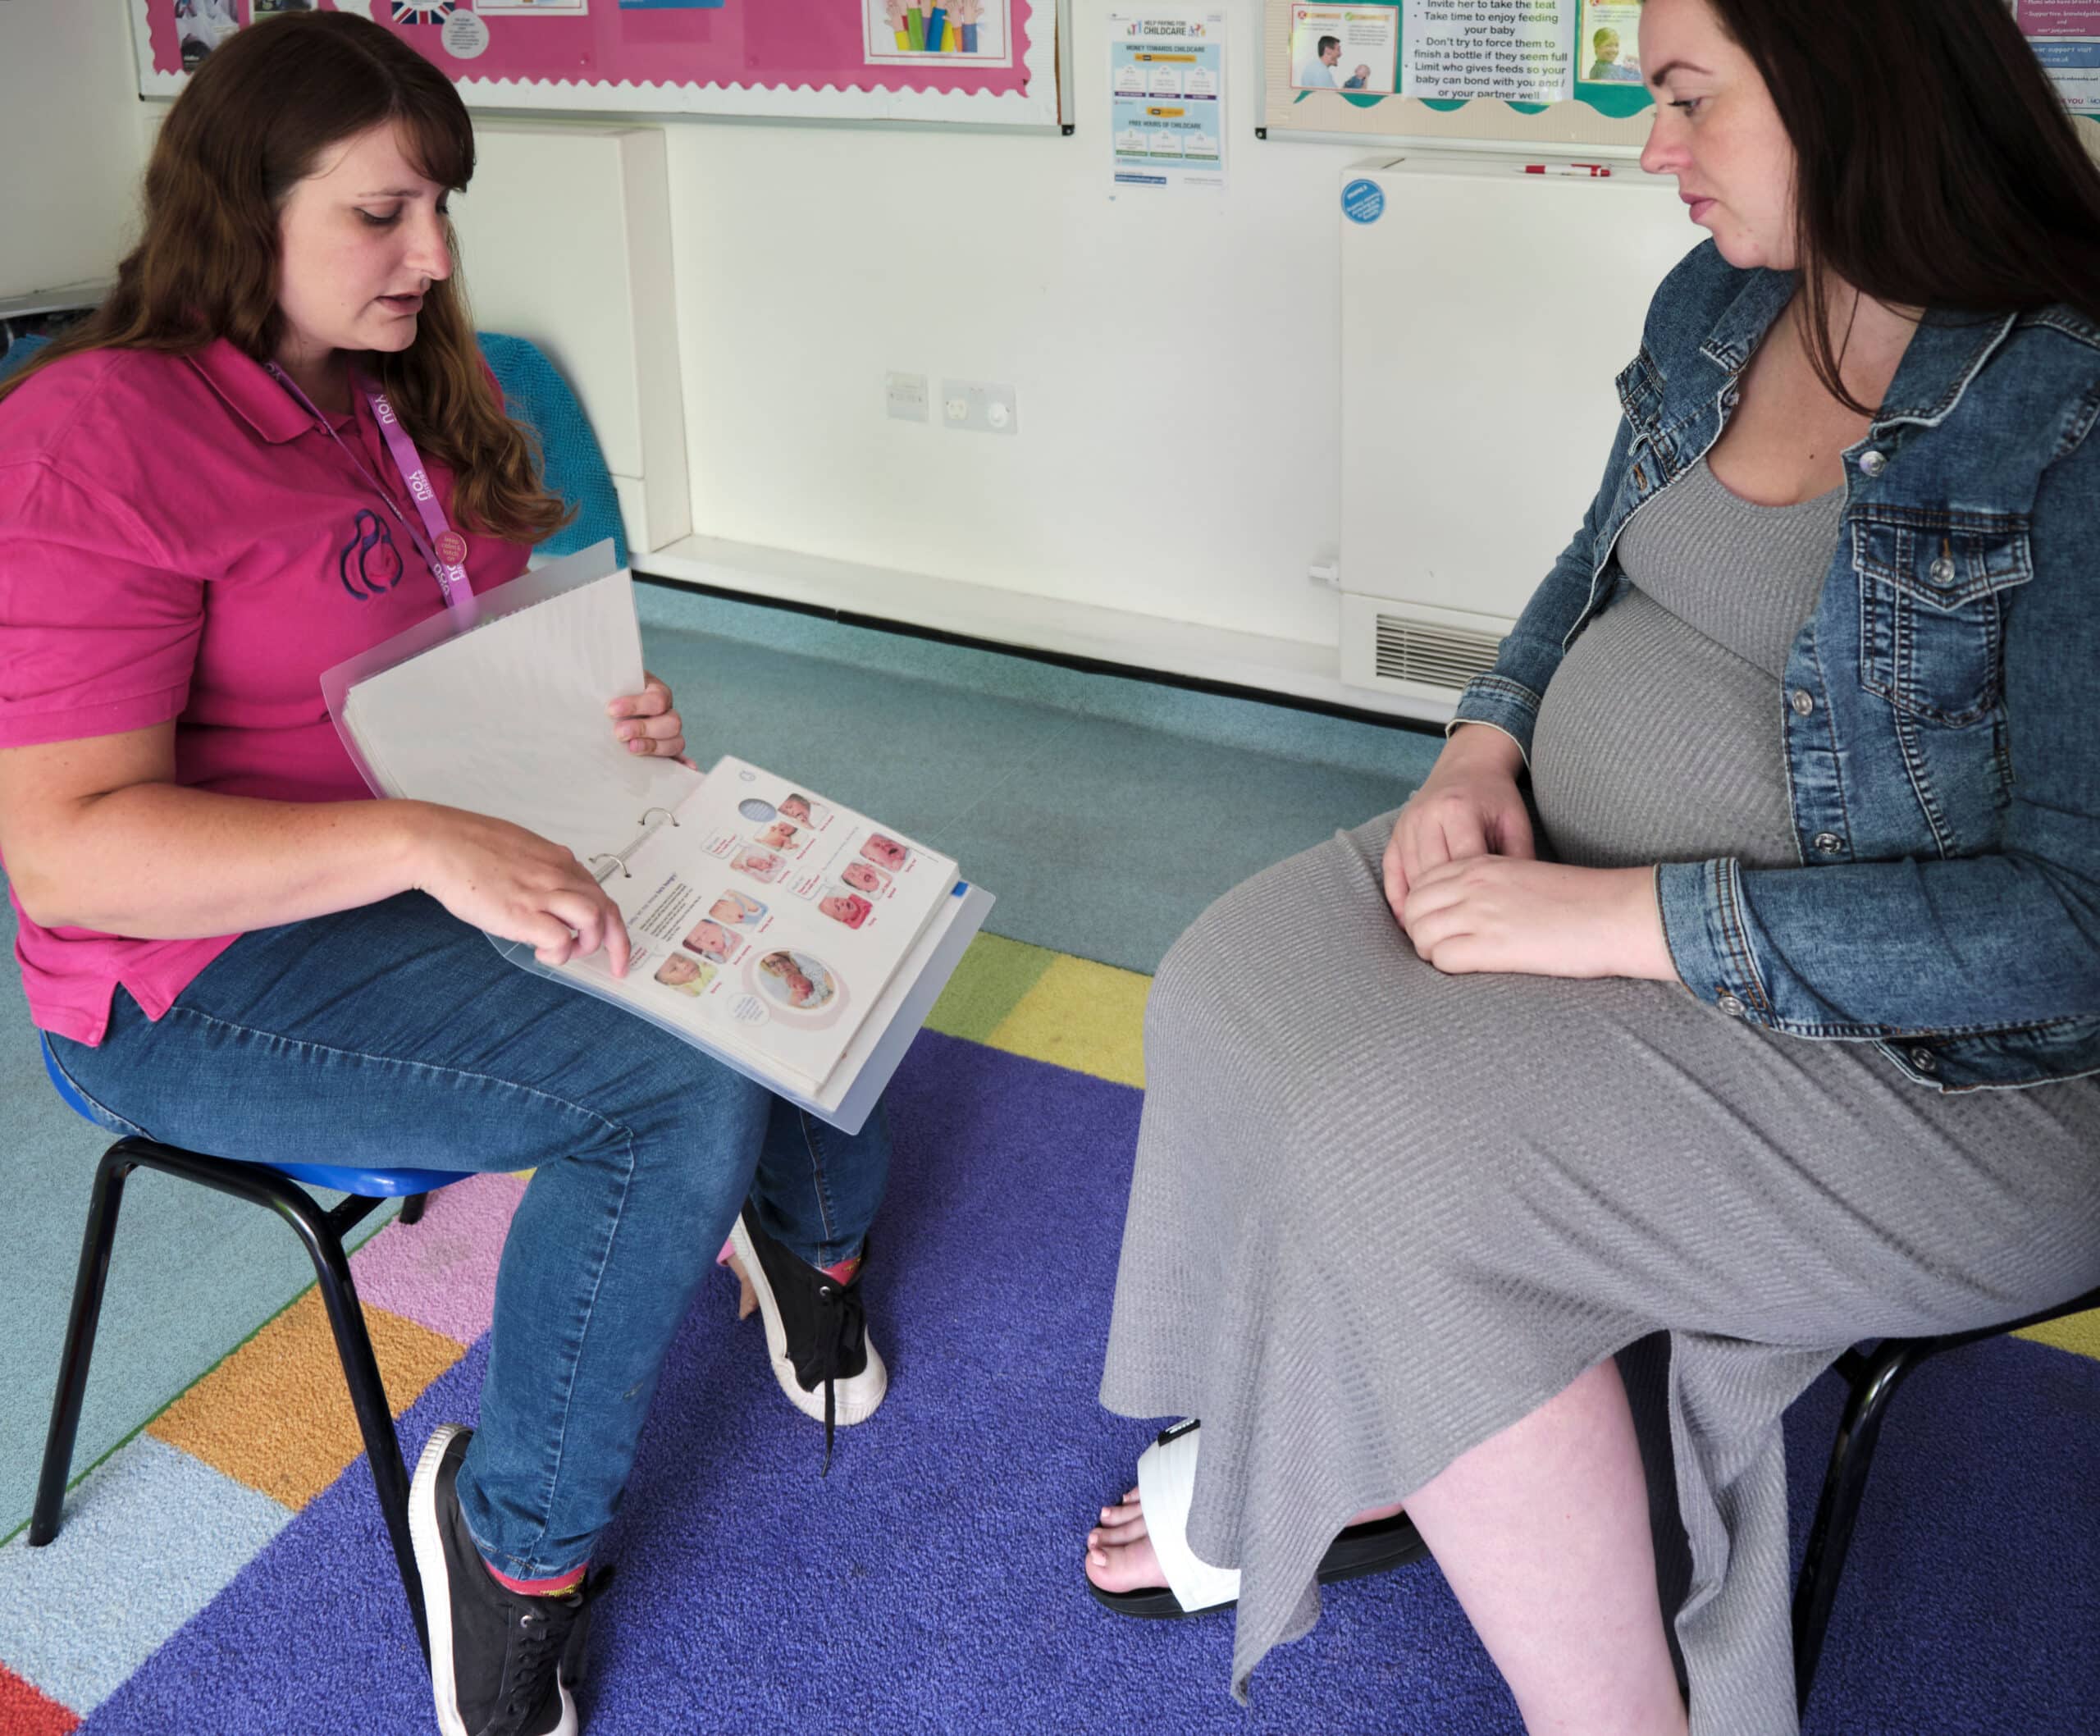 Pregnant mother getting support from a peer supporter